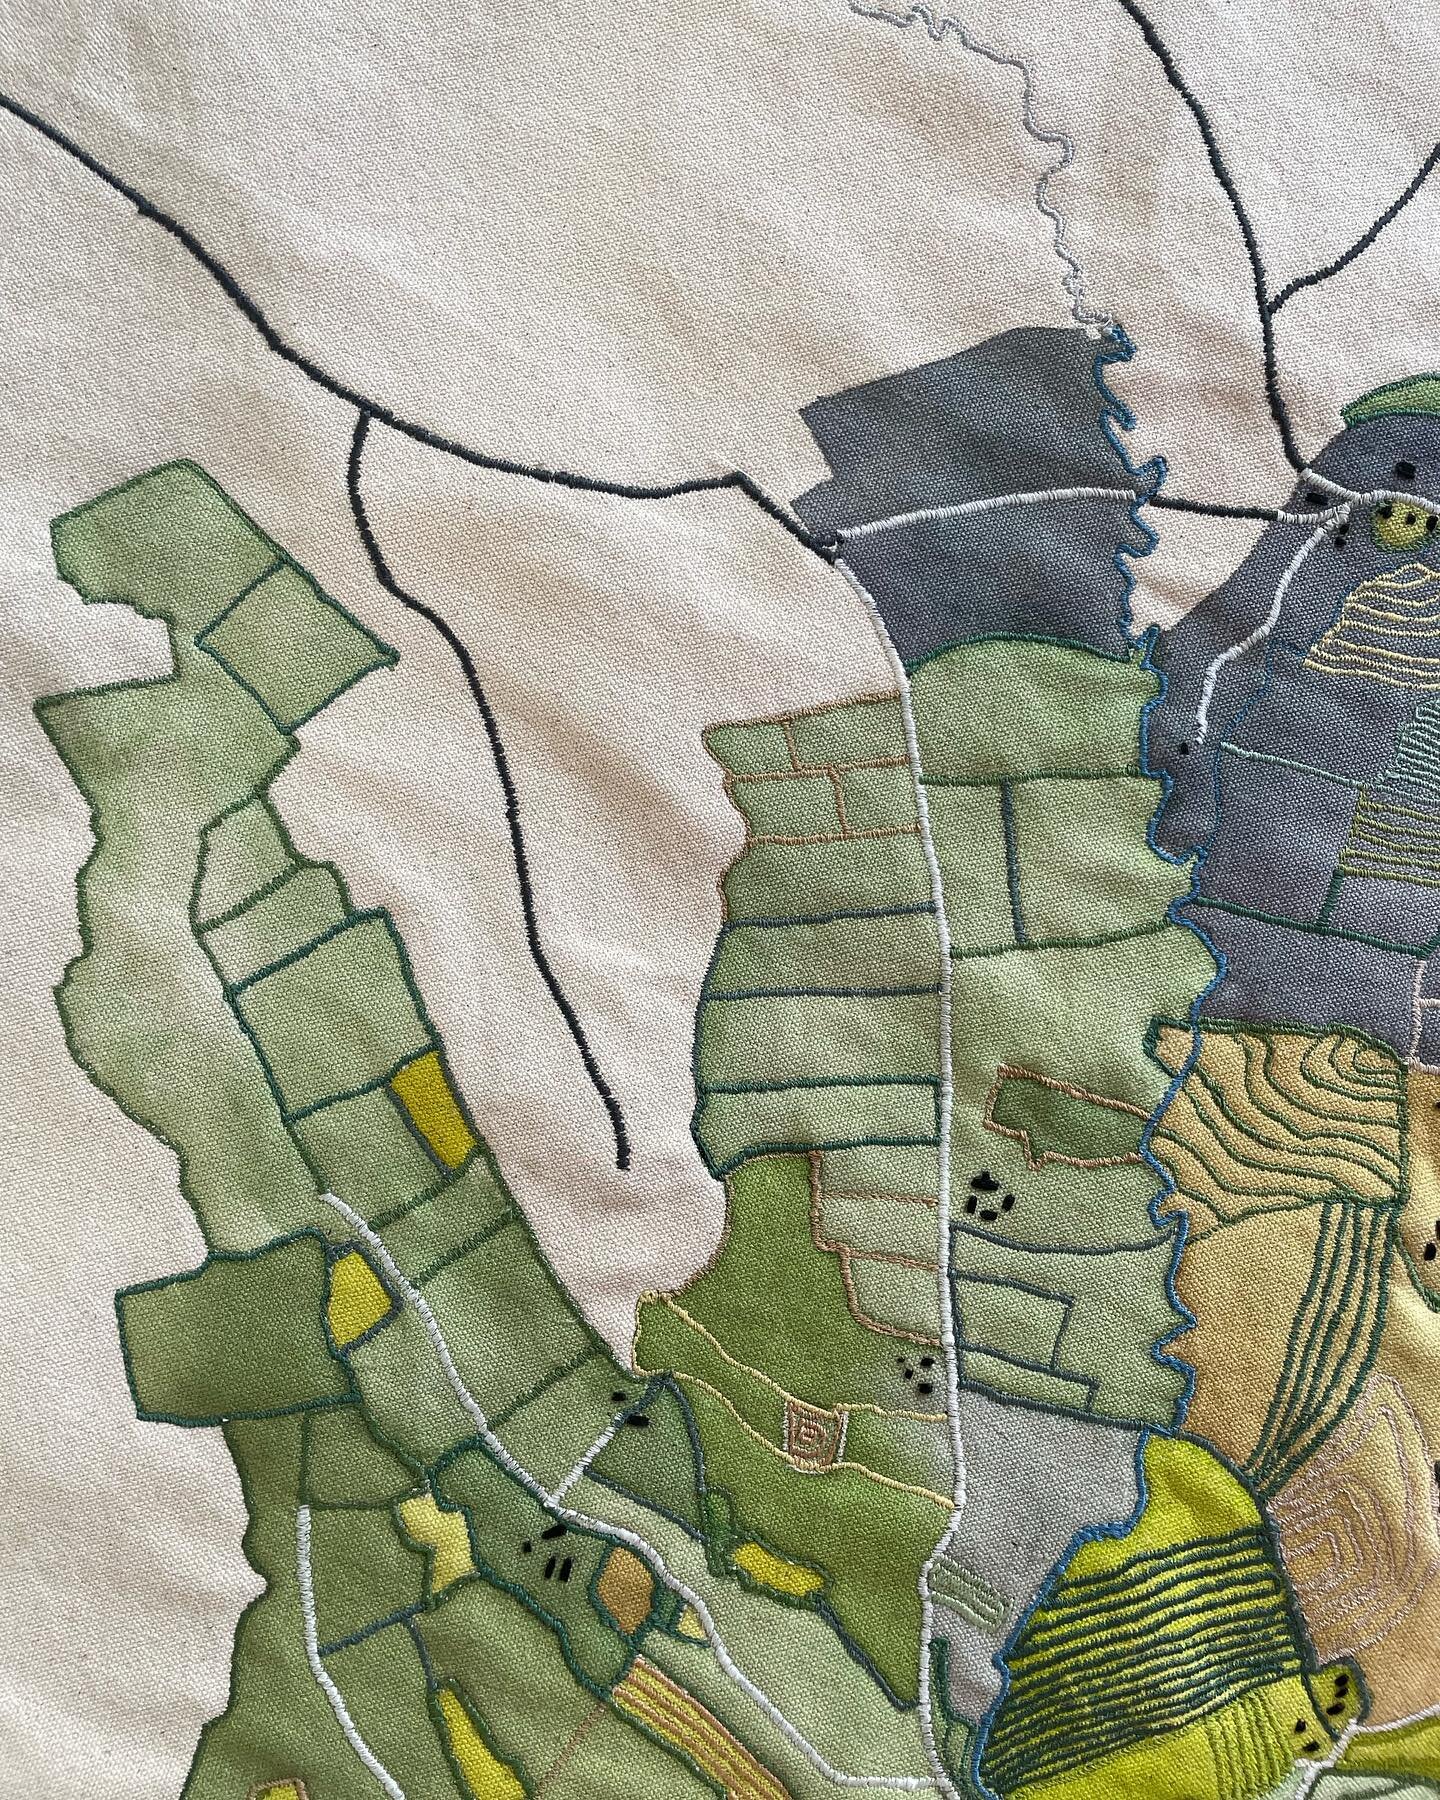 Here are some close-ups of my current map commission of a Yorkshire valley. It&rsquo;s getting there!
#textileart #contemporarytextiles #textileartist #stitchedmap #mapart #landscapeart #map #yorkshire #katetarlingtextiles